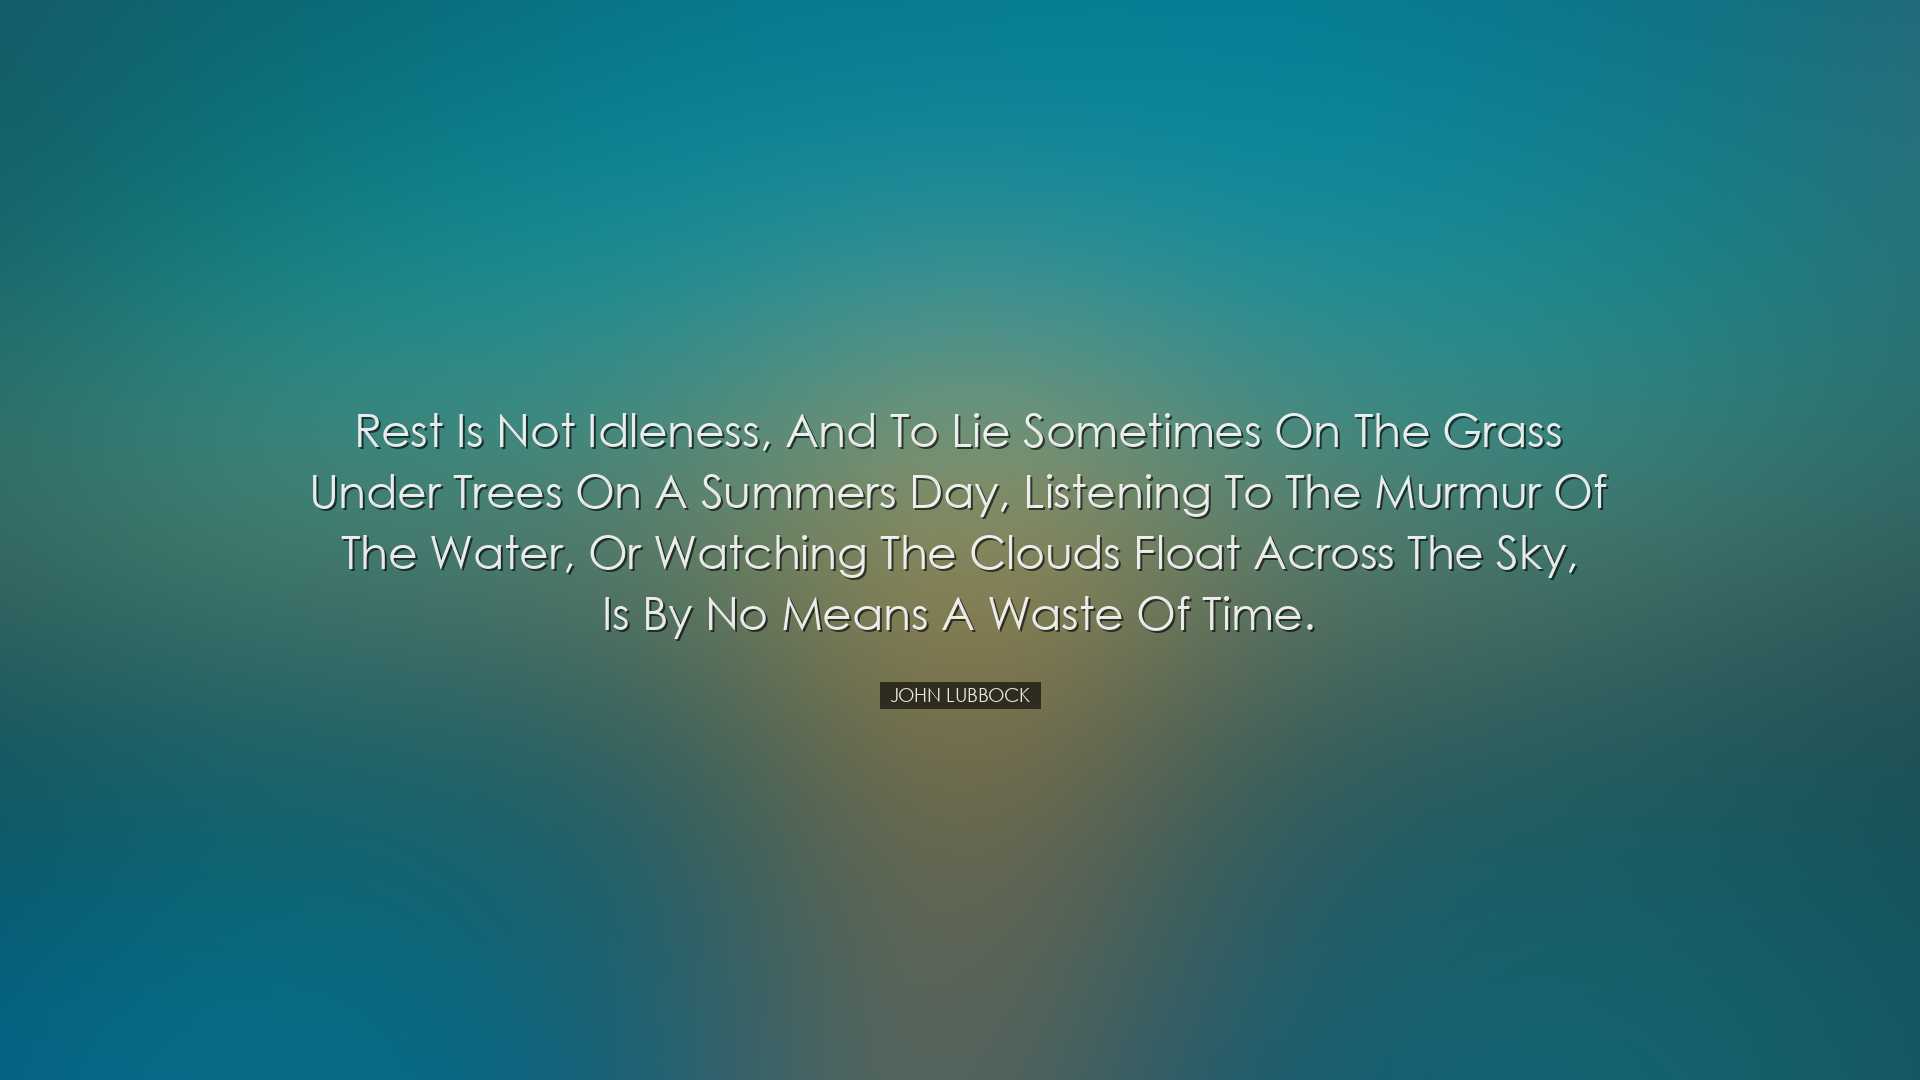 Rest is not idleness, and to lie sometimes on the grass under tree